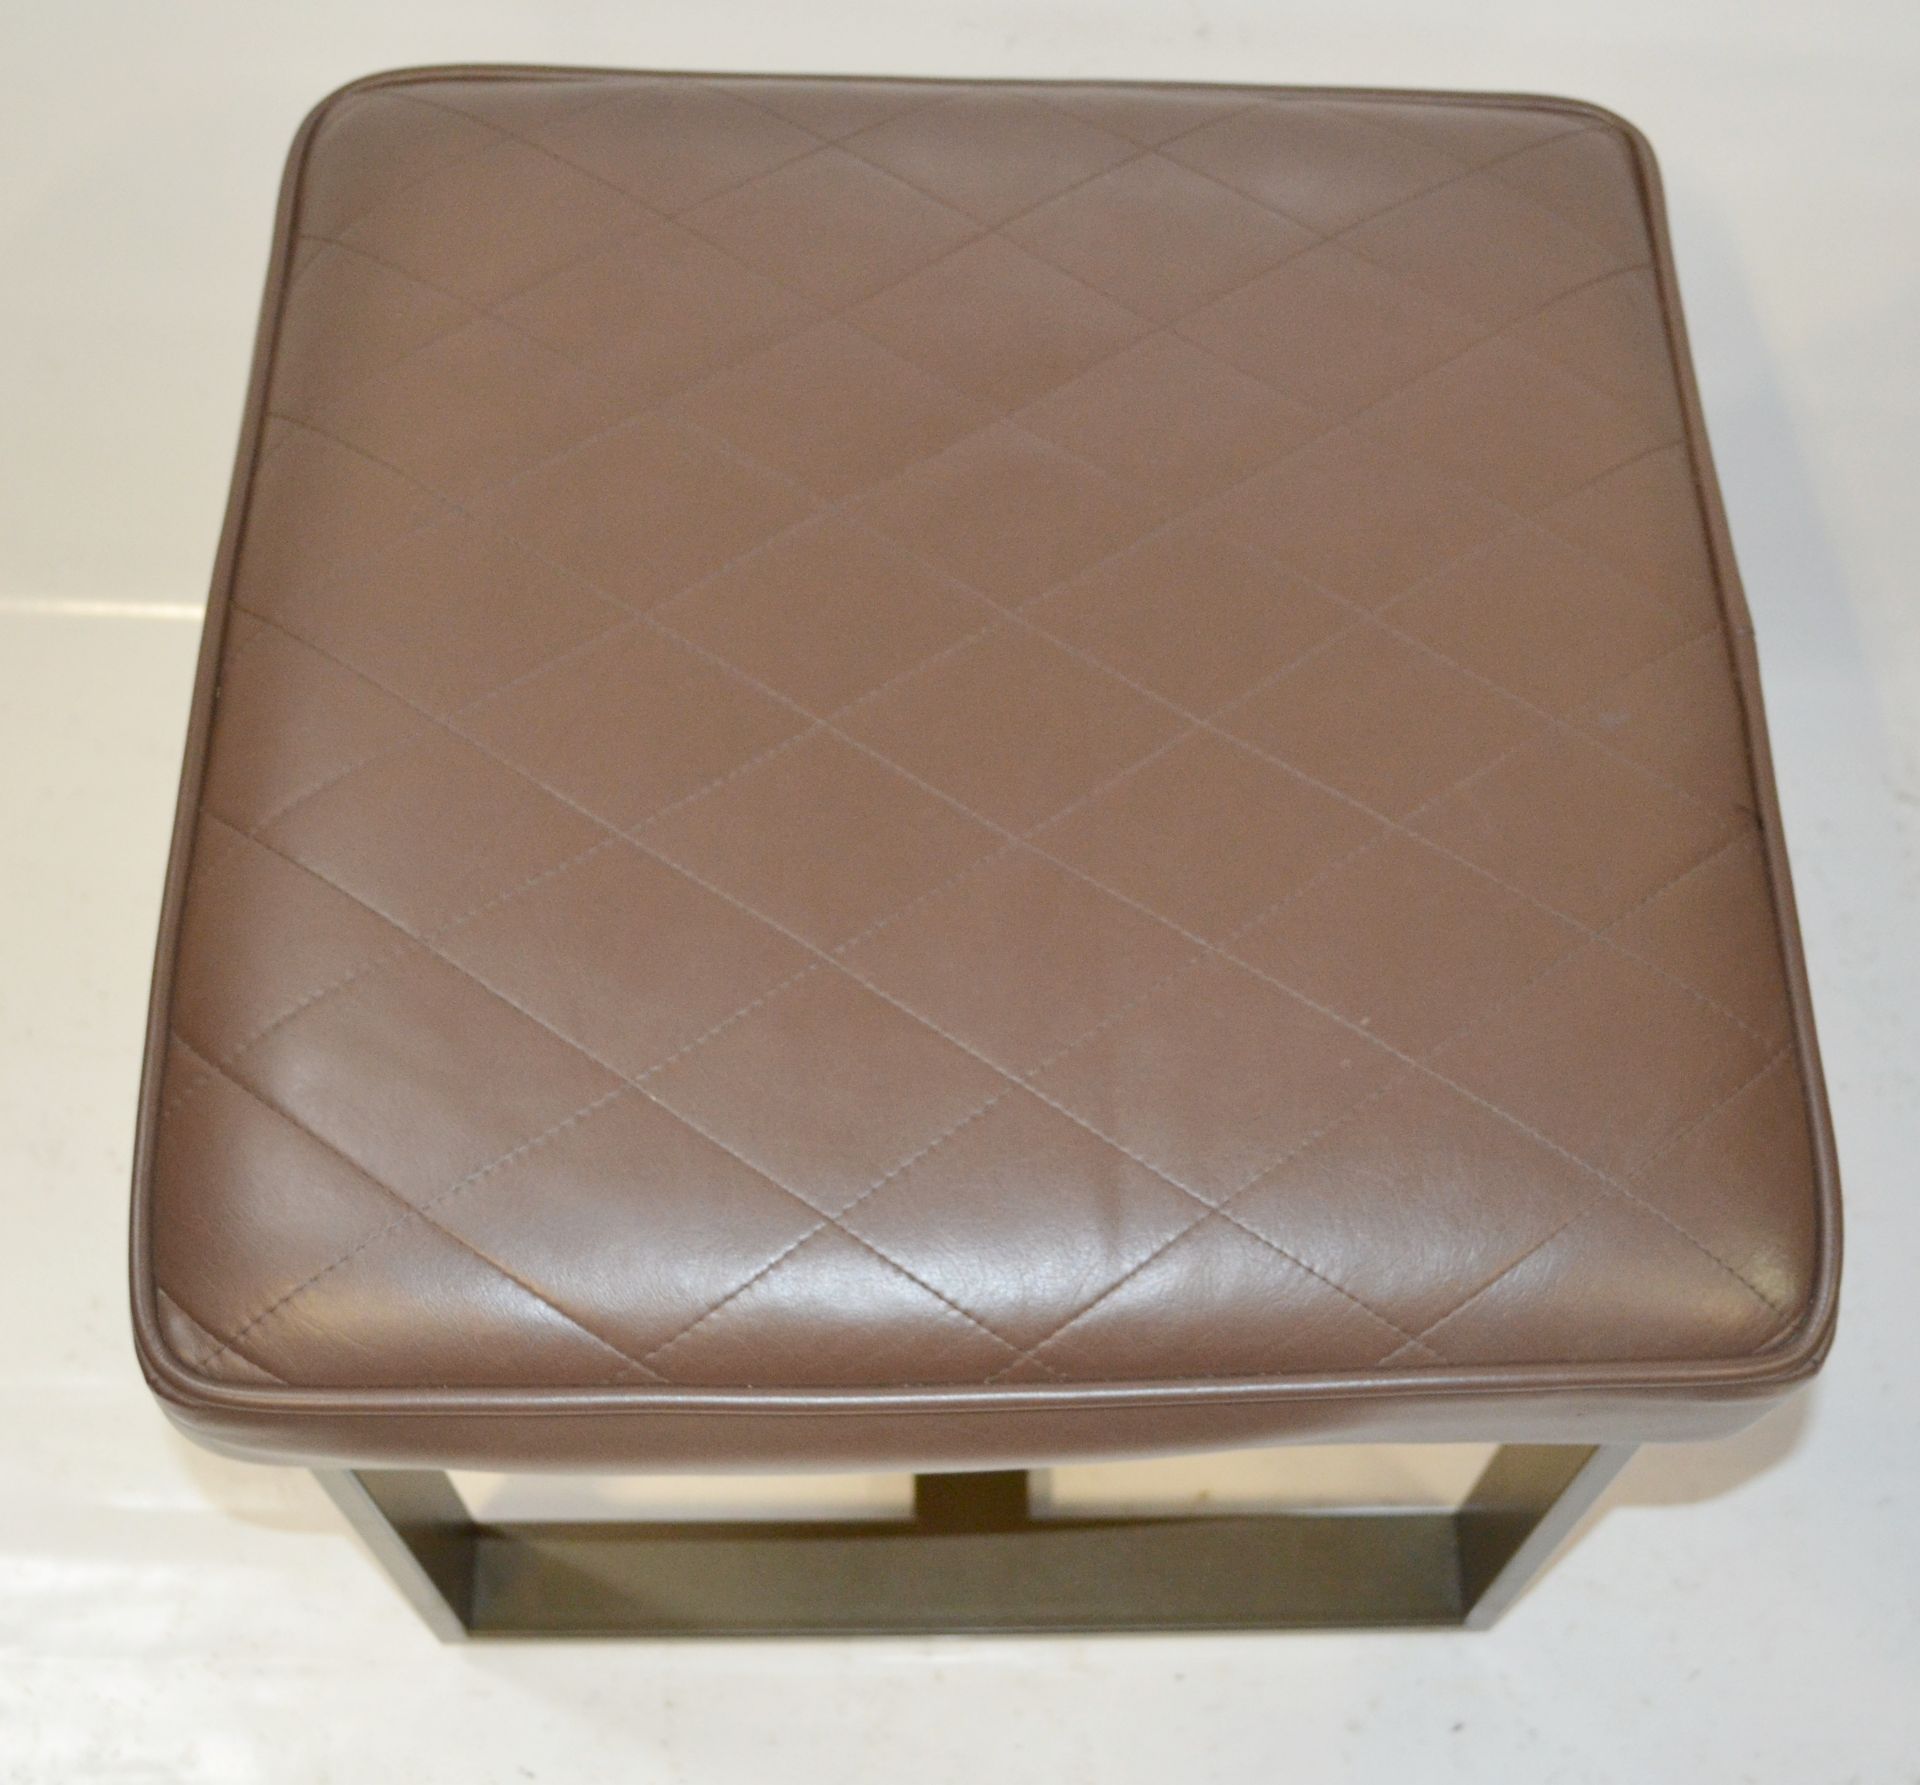 Pair Of Upholstered Stools In A Brown Faux Leather - Recently Removed From A Major UK Store In - Image 3 of 5